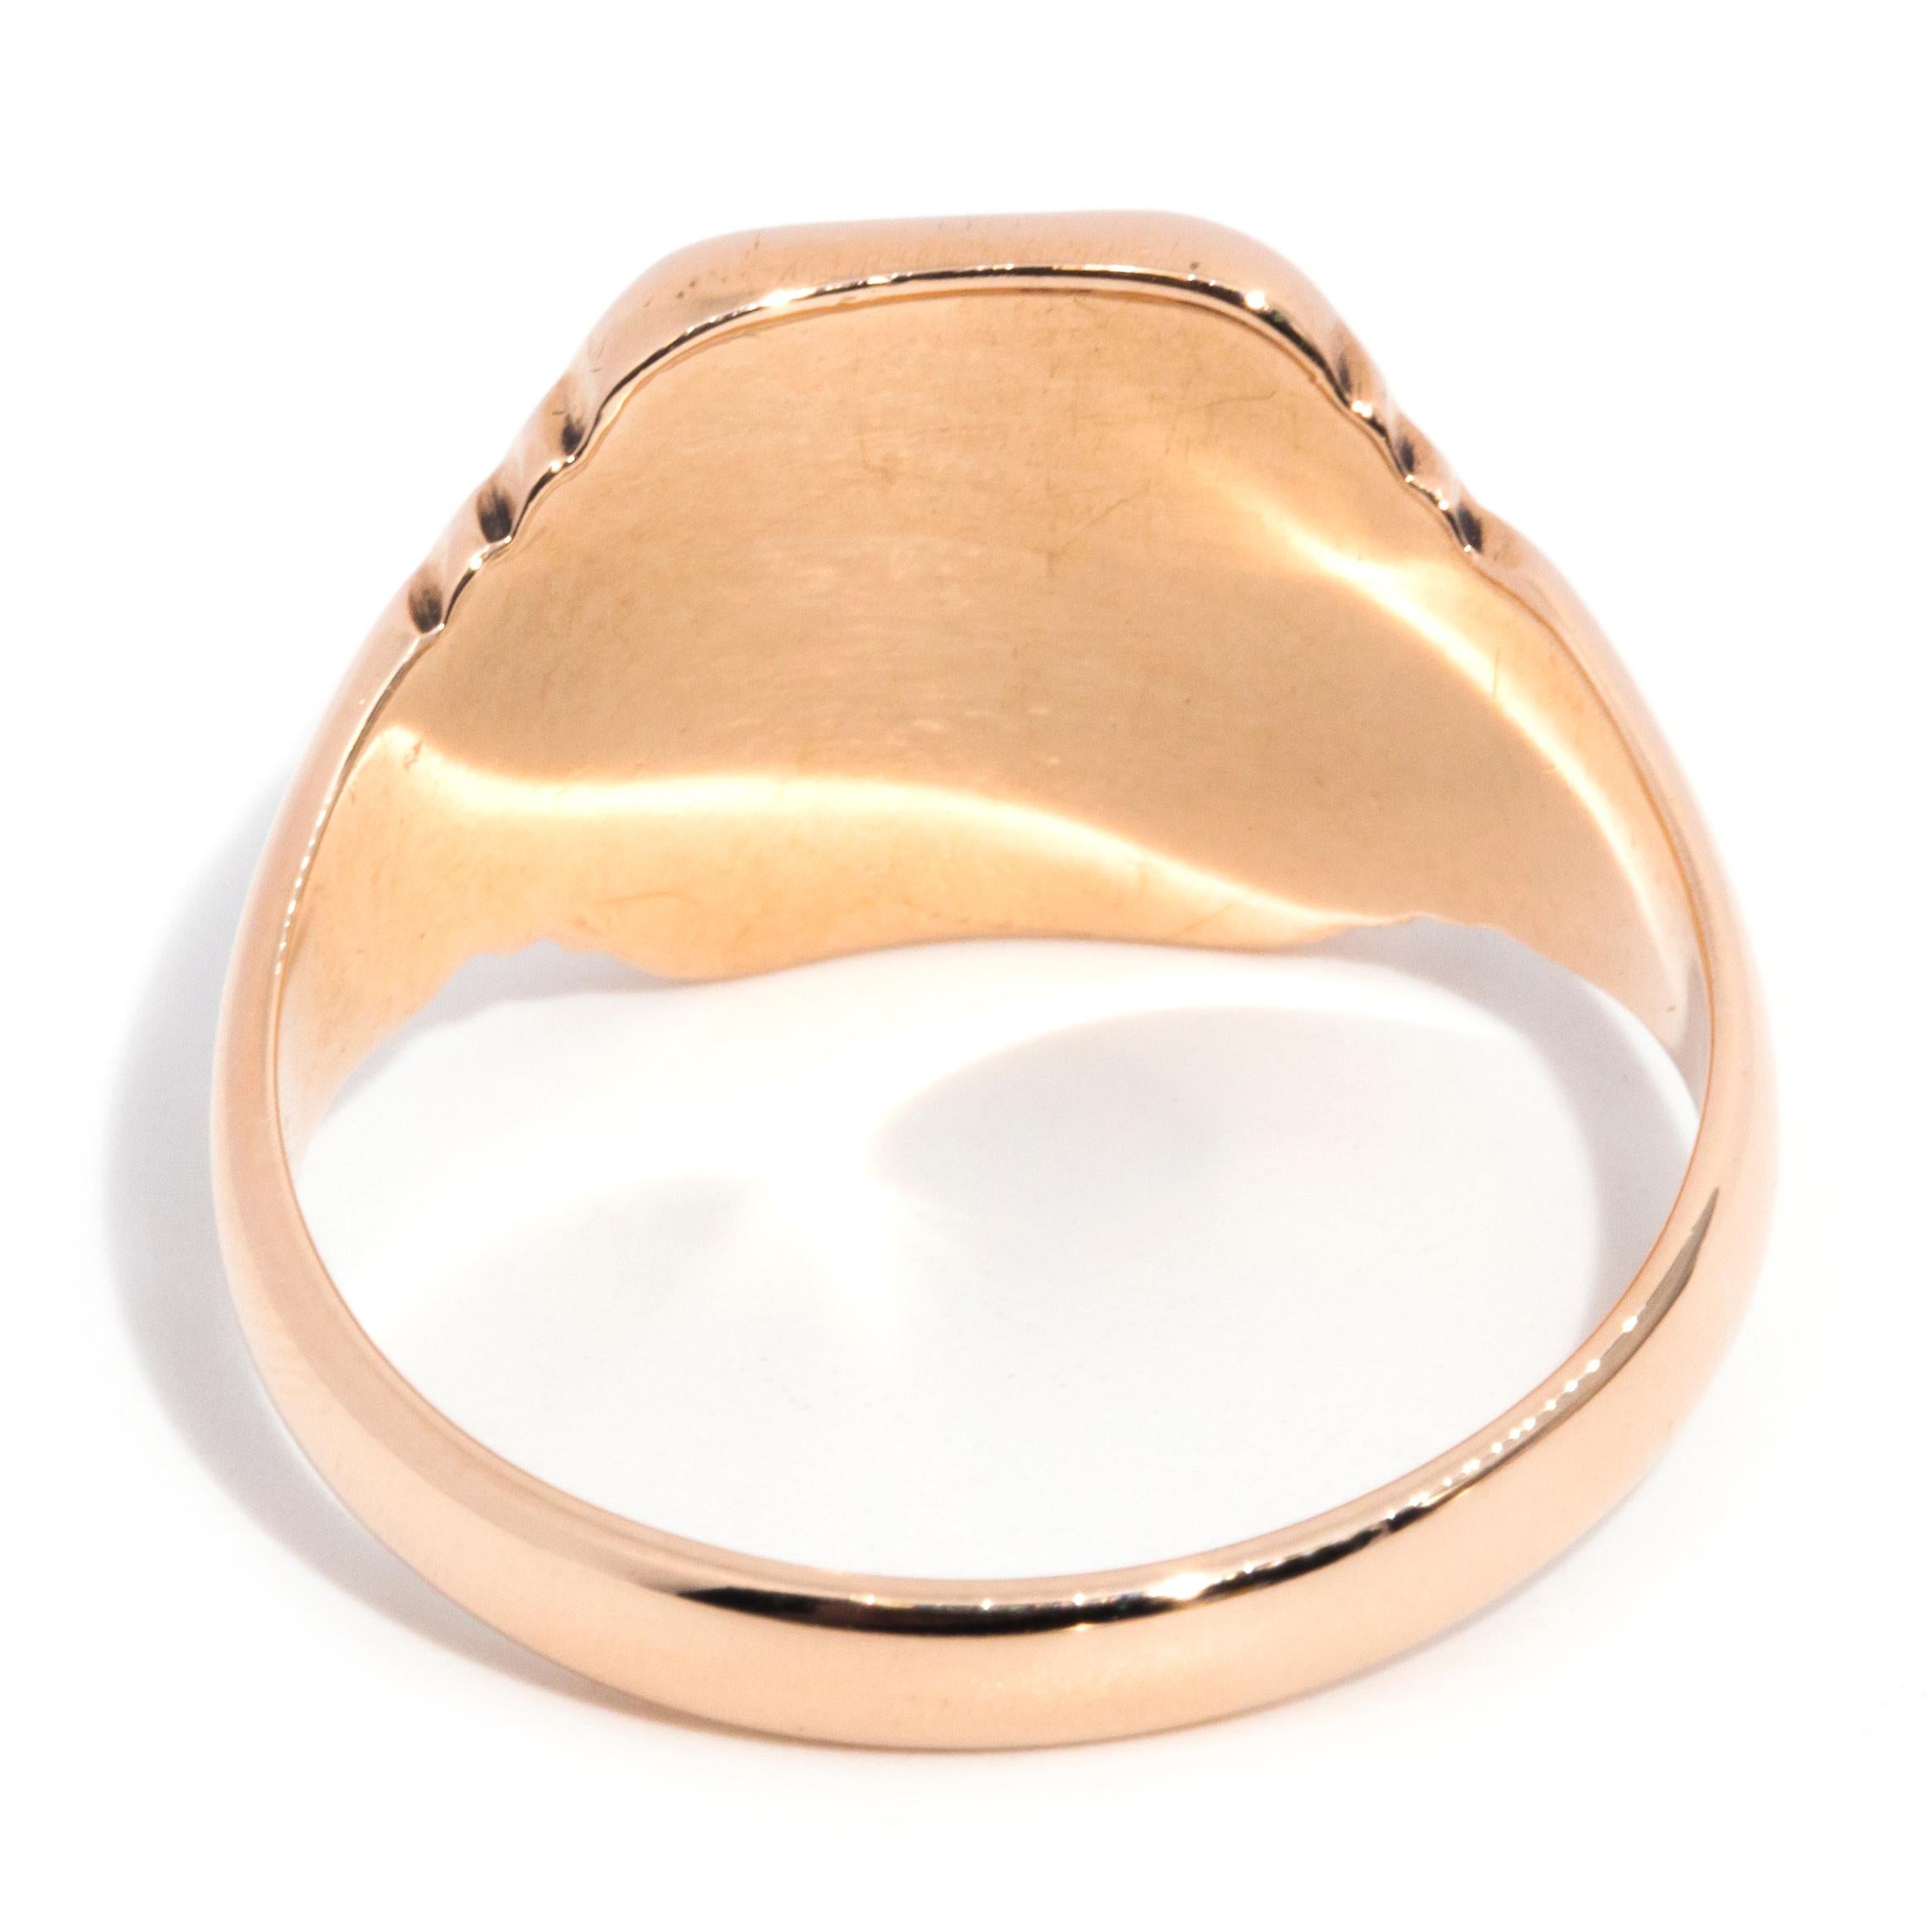 Circa 1970s 9 Carat Rose Gold Mens Rectangle Shaped Unengraved Signet Ring In Good Condition For Sale In Hamilton, AU